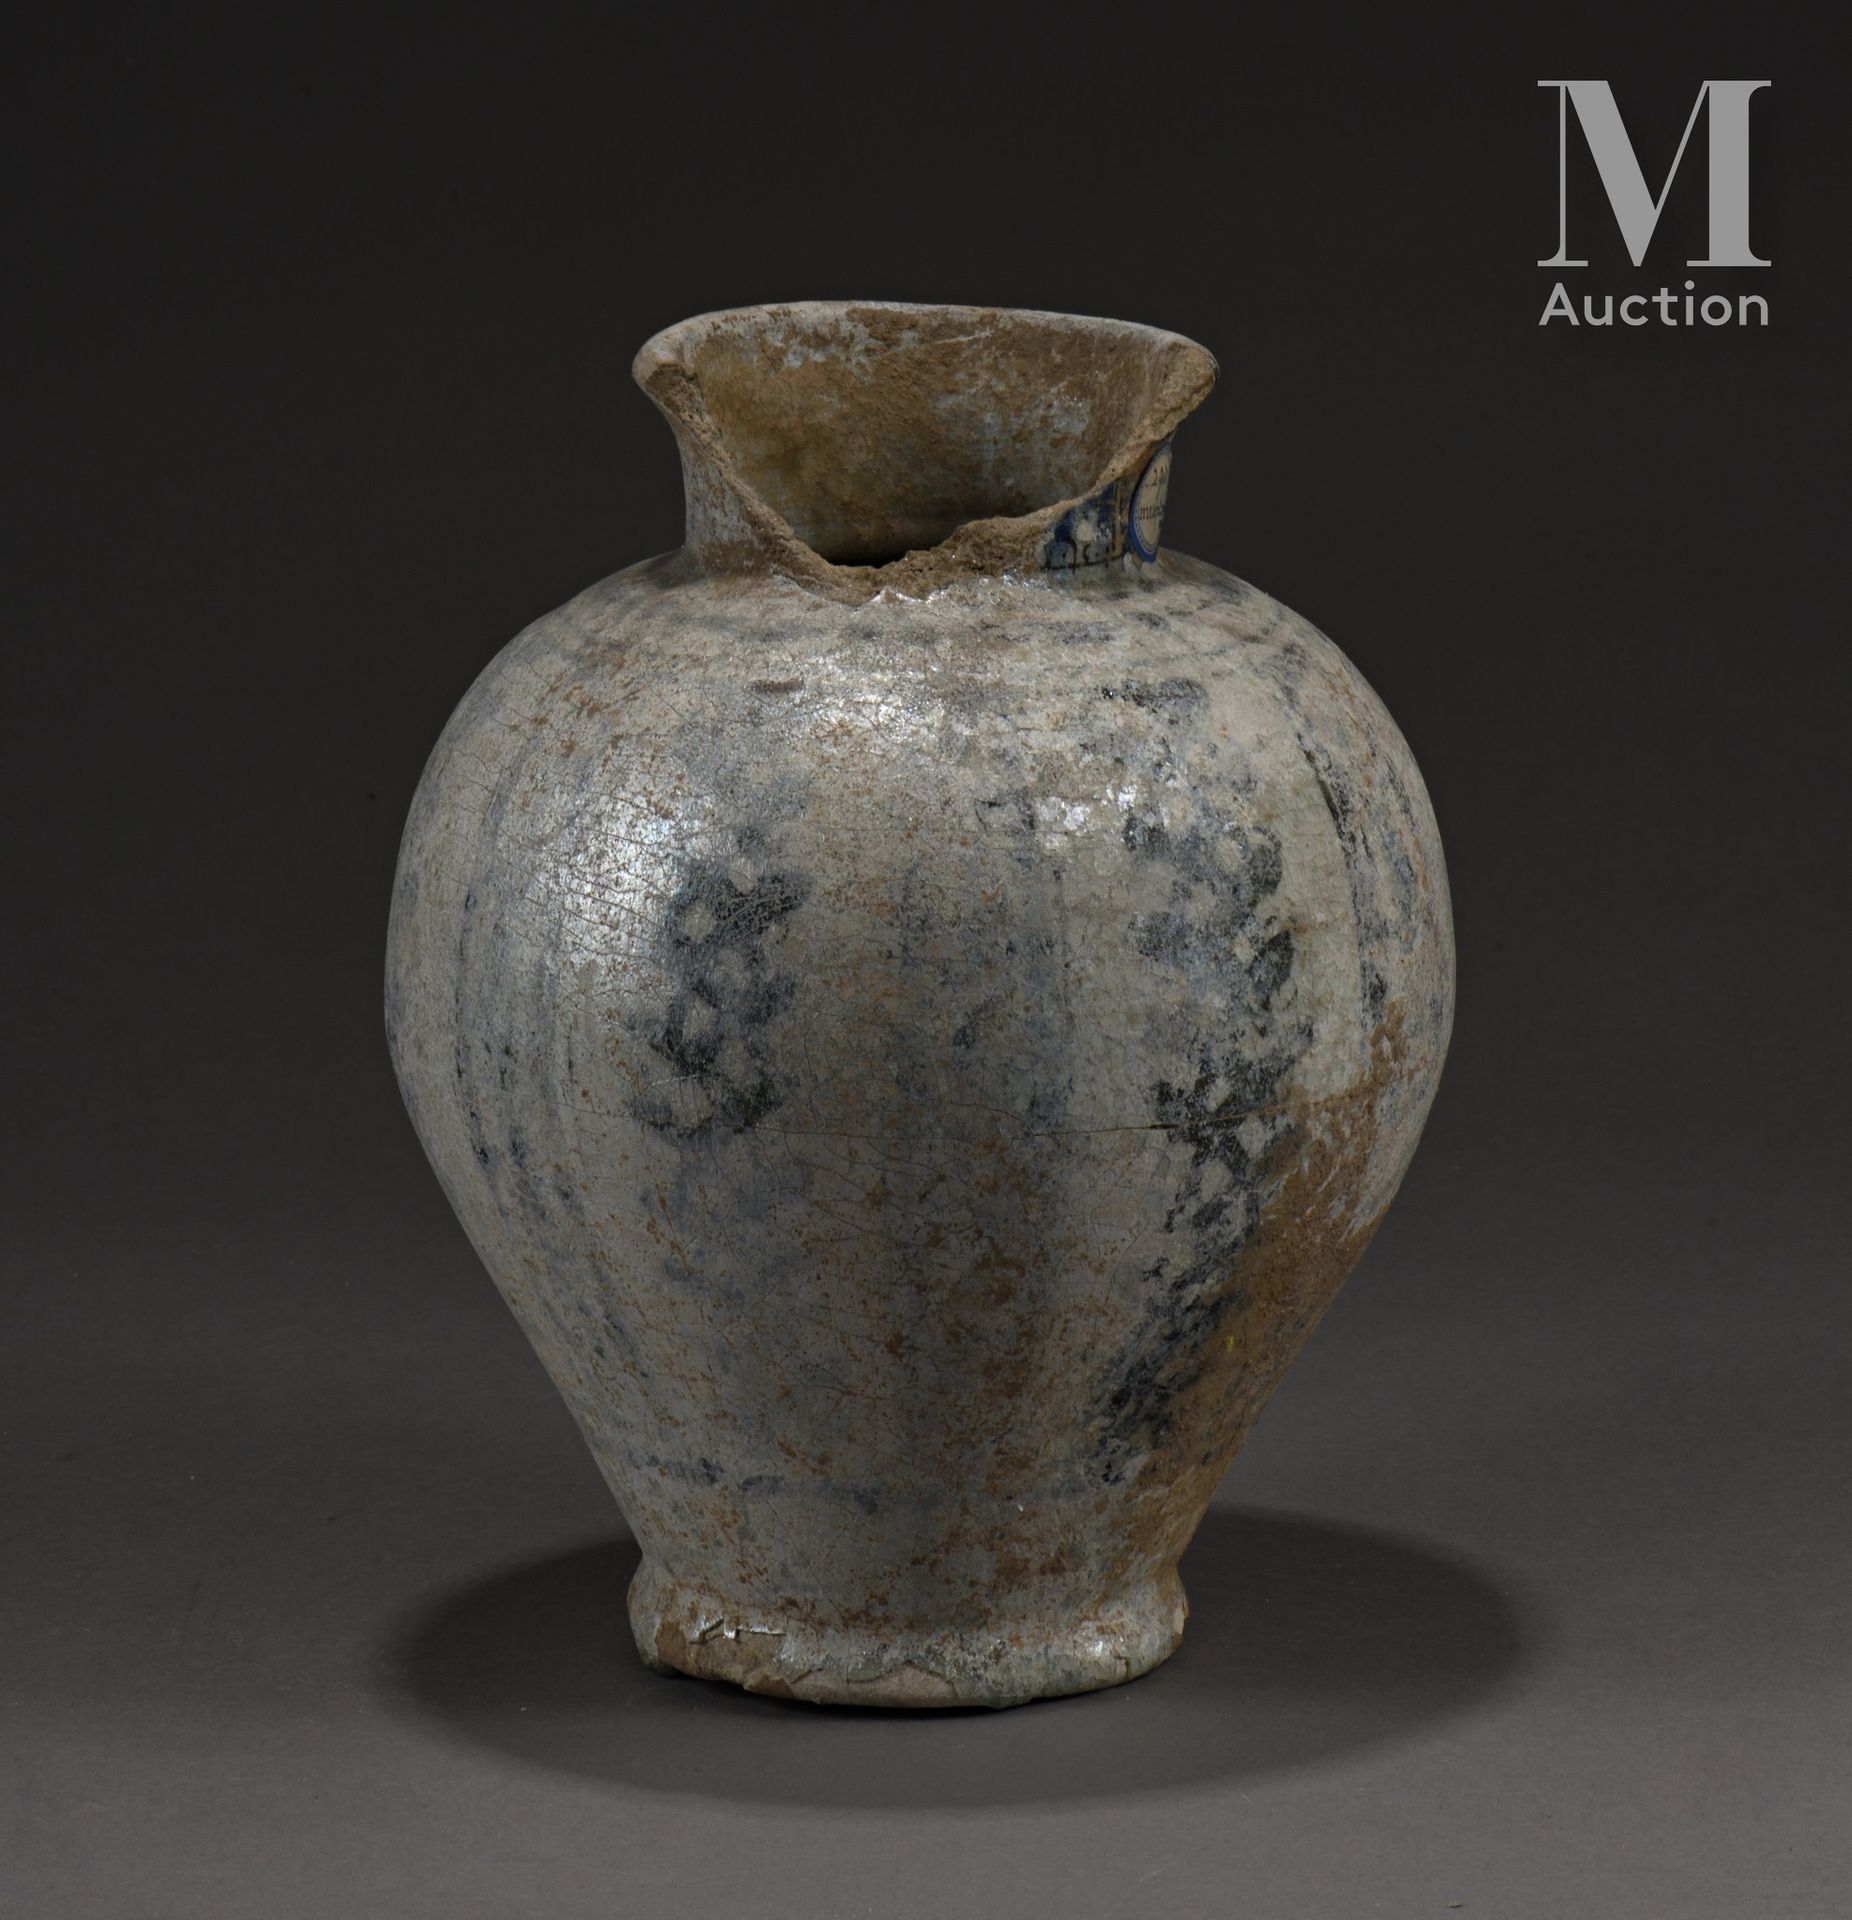 Vase mamelouque Egypt or Syria, 14th-15th century

A baluster-shaped ceramic ves&hellip;